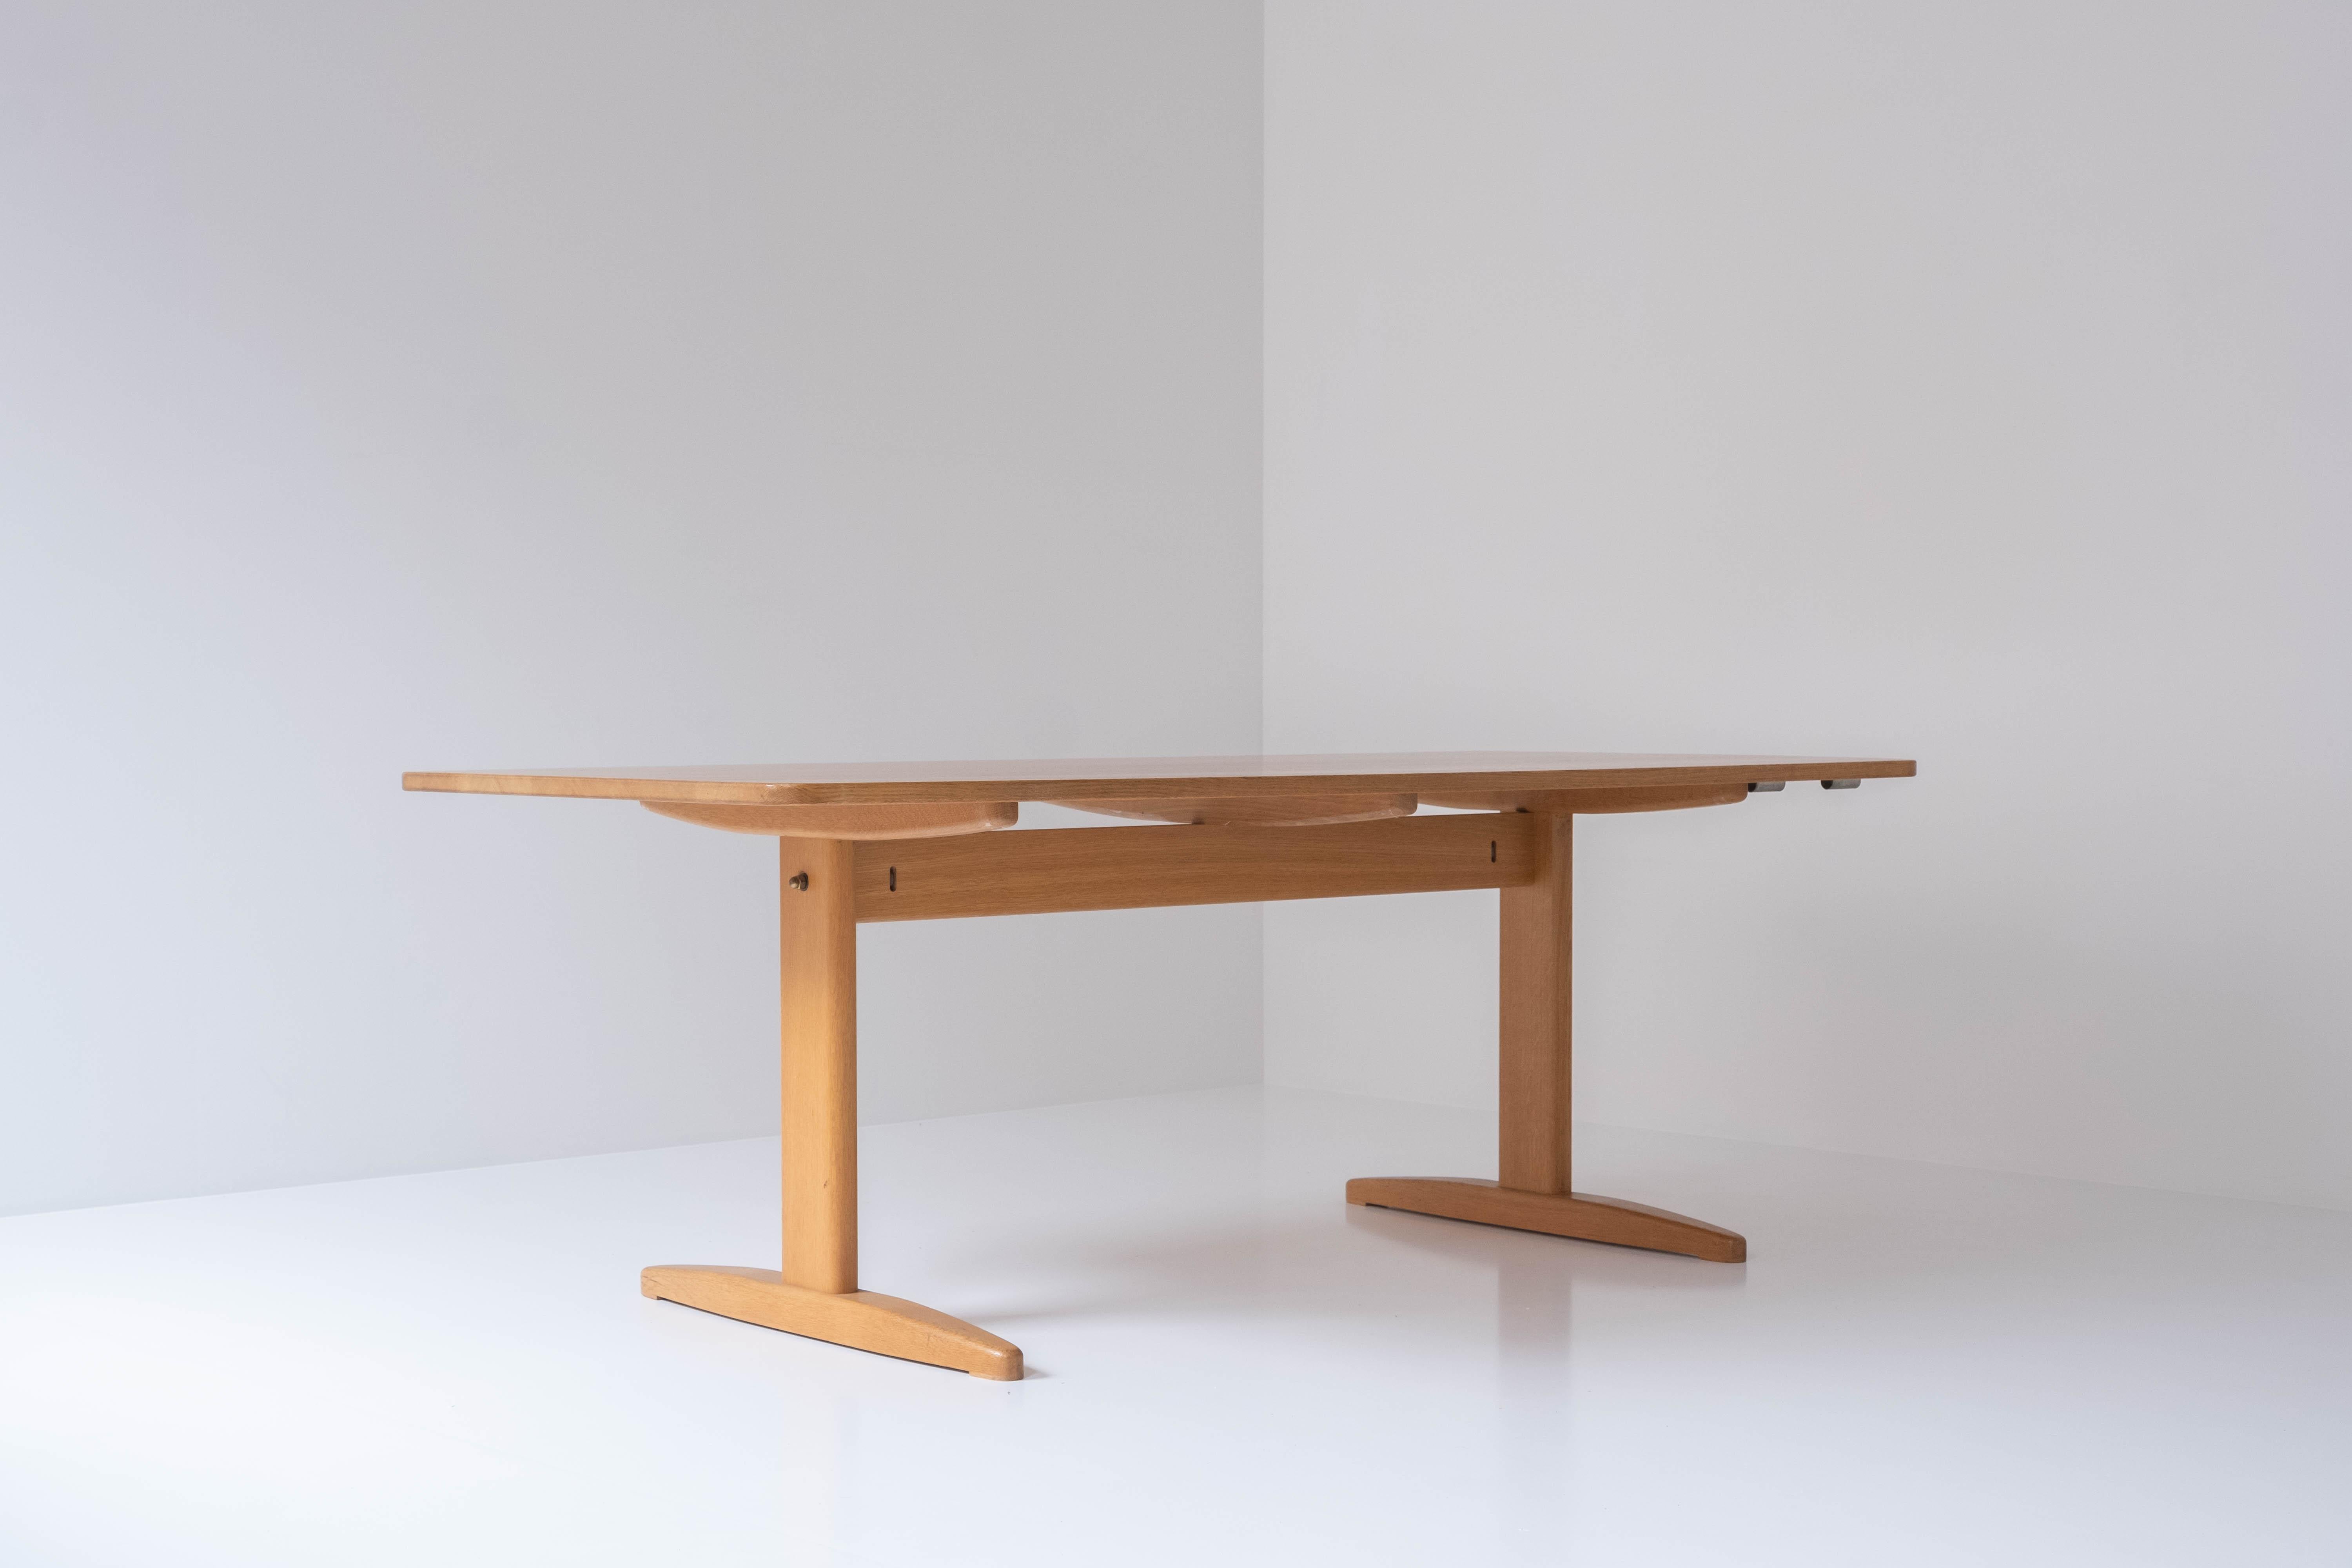 Shaker dining table designed by Børge Mogensen for Carl Madsen & Son, Denmark 1960s. This table is made out of oak and features 1 extension. Slightly different colour between the table top and extension. Signed underneath. Well presented original